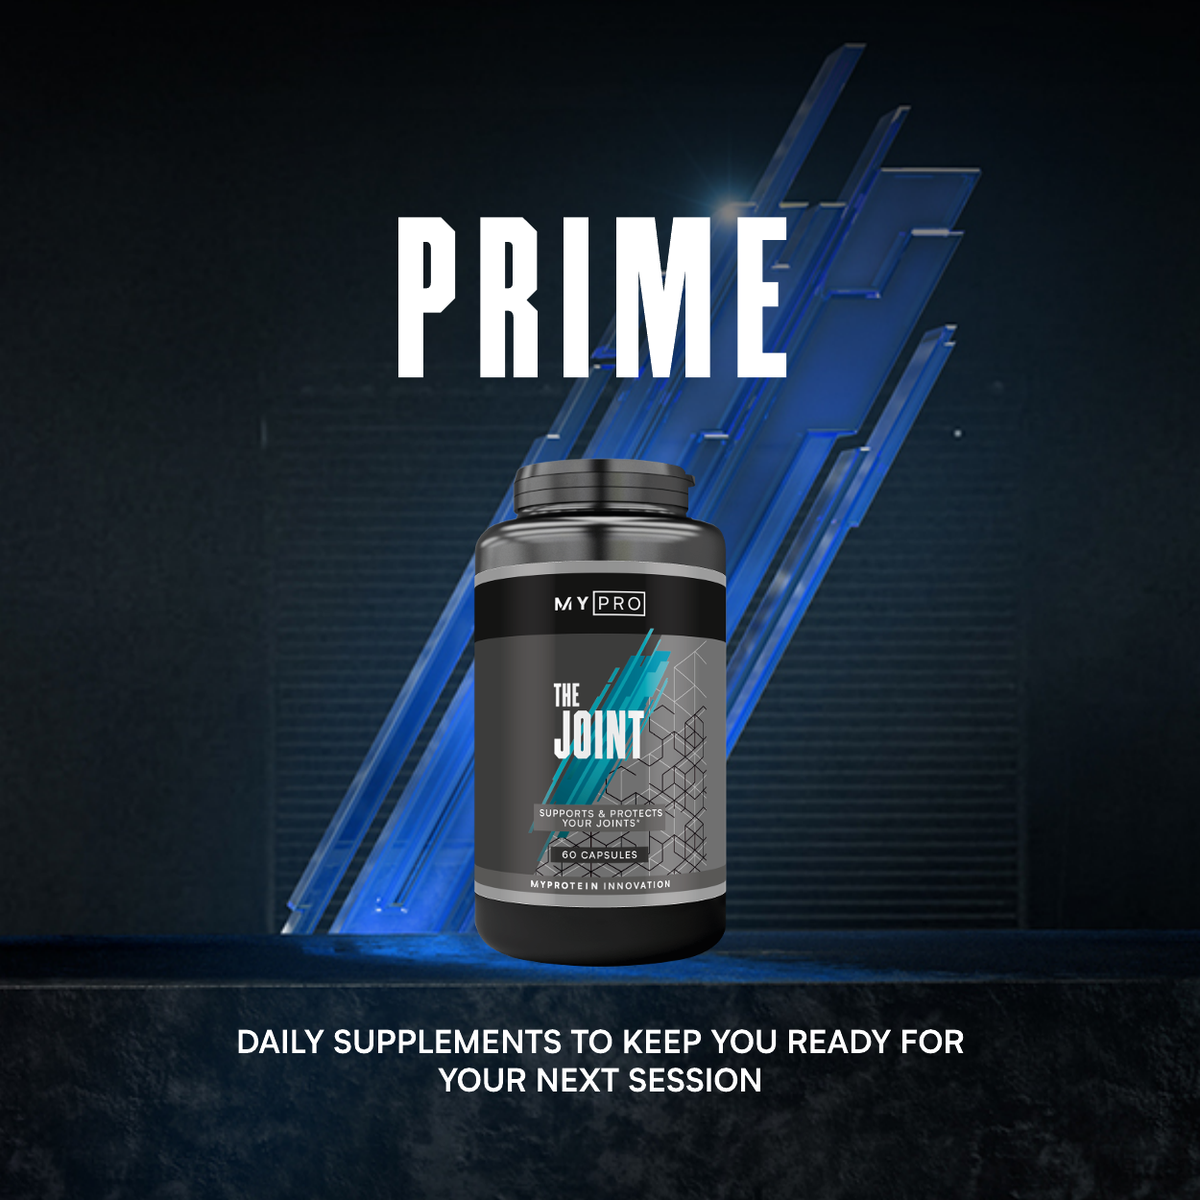 Prime. Daily supplements to keep you ready for your next session